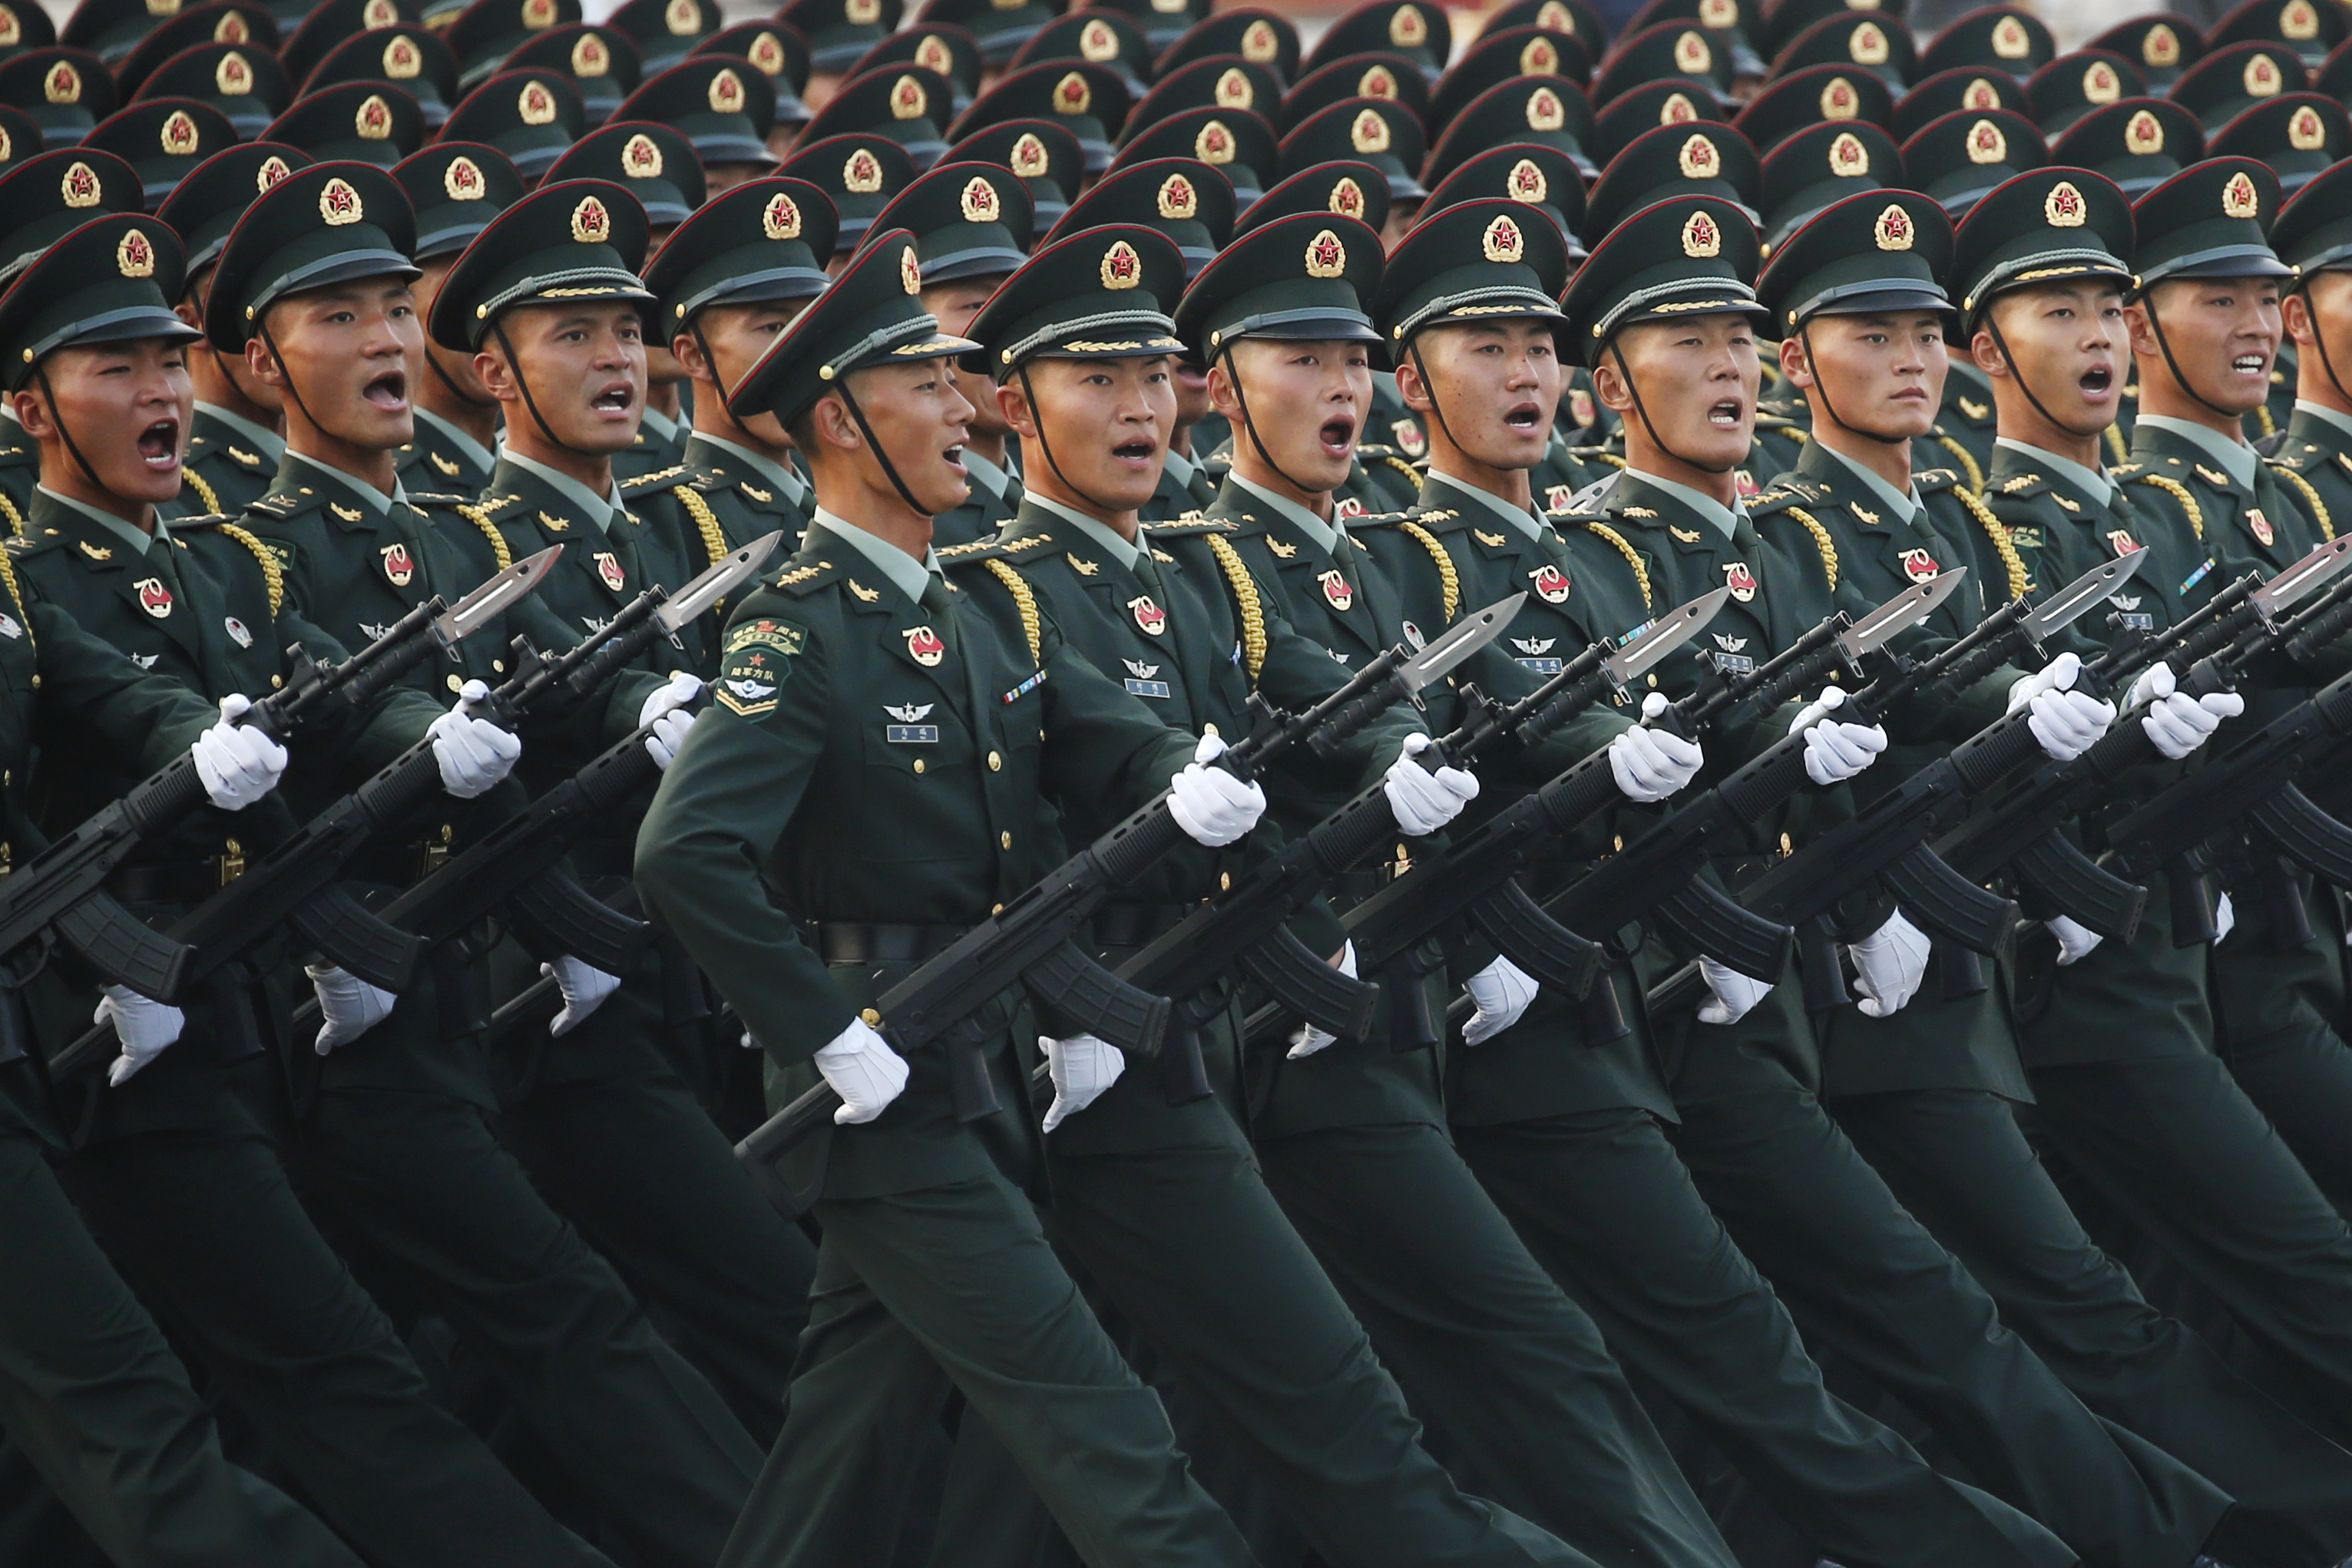 Soldiers of People's Liberation Army (PLA) march in formation past Tiananmen Square during a rehearsal before a military parade marking the 70th founding anniversary of People's Republic of China